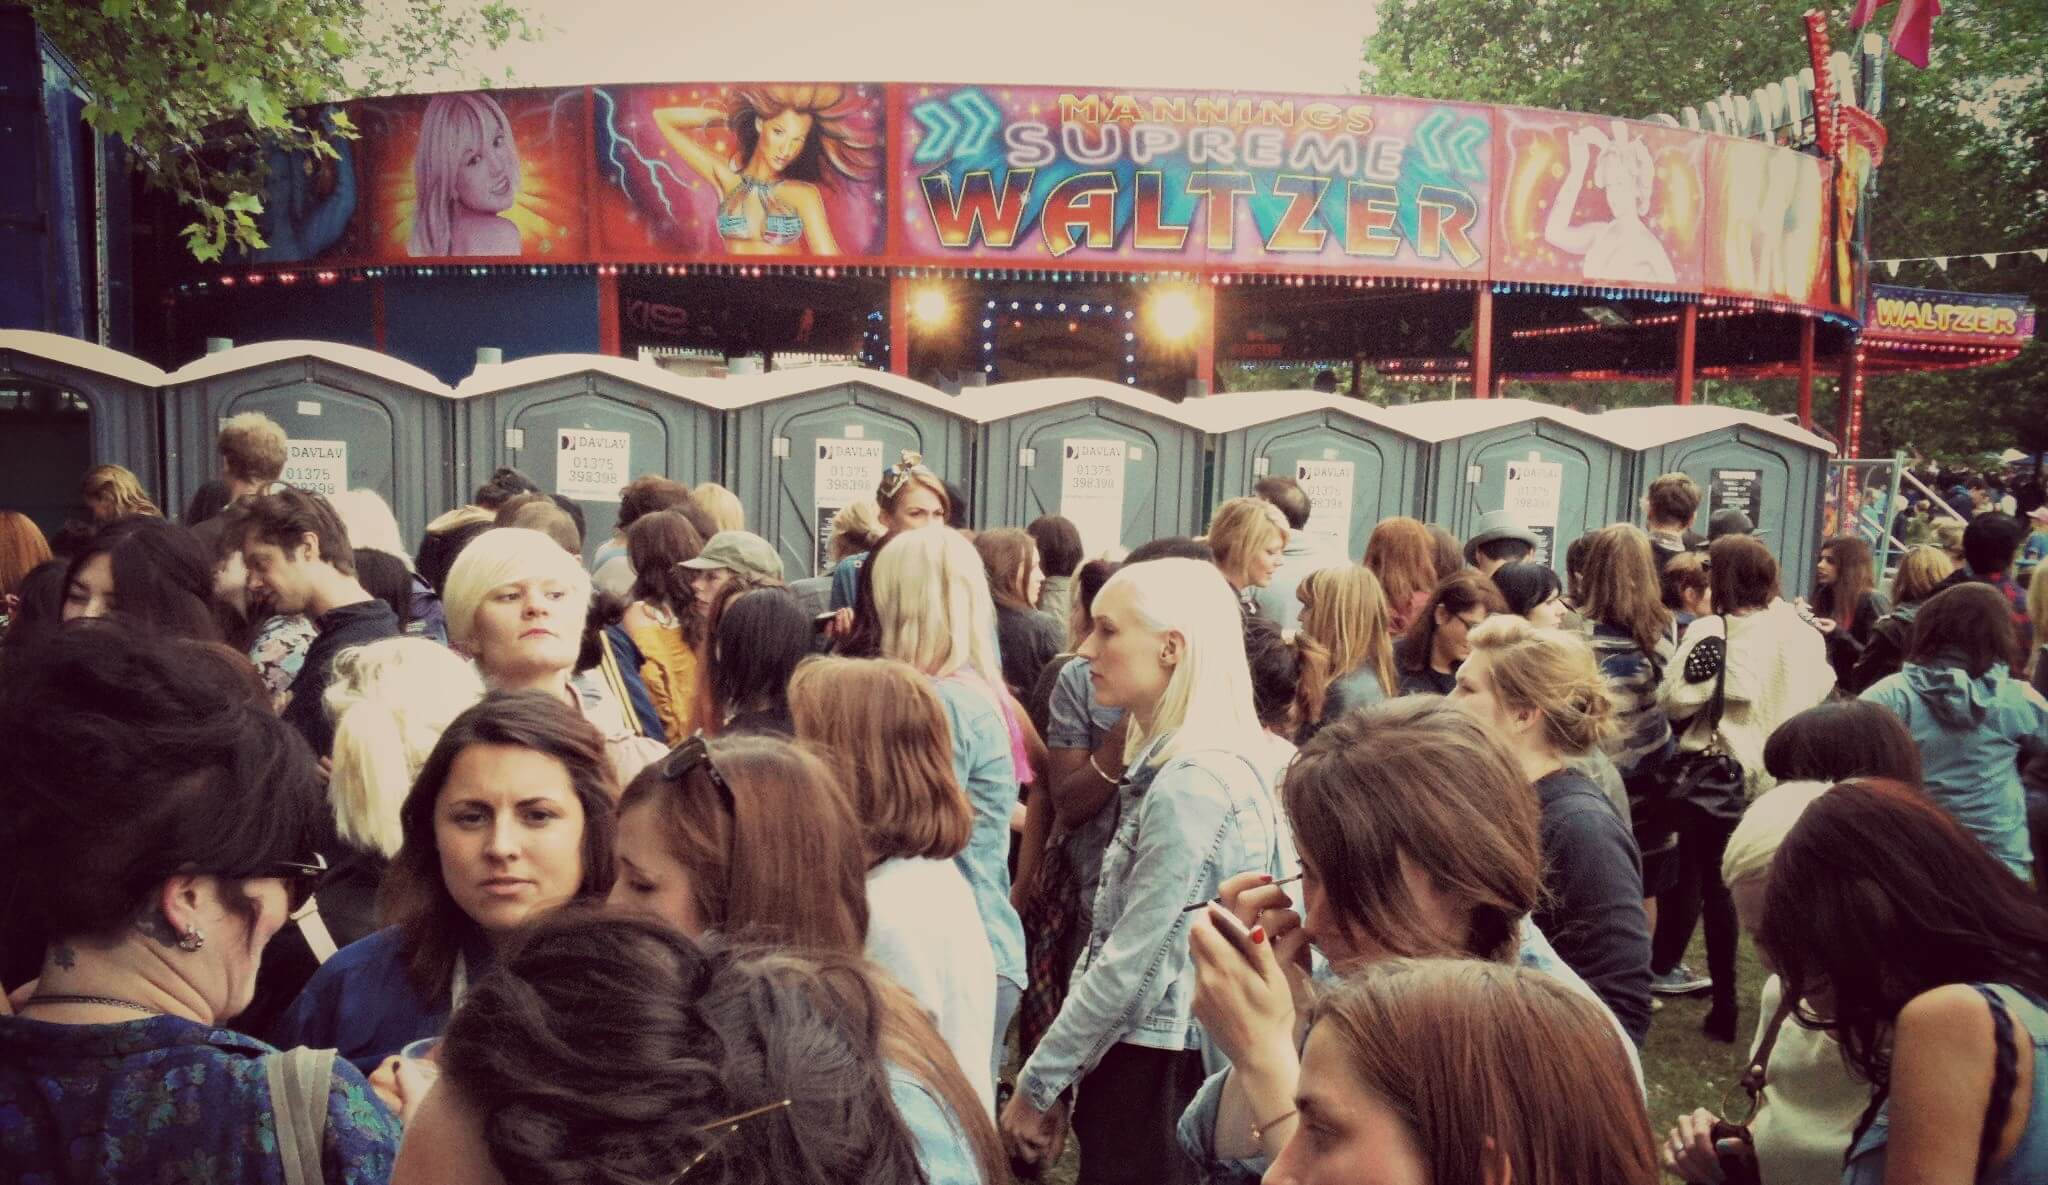 How to Avoid Festival Toilets in 9 Simple Ways [Camping Toilet Review]